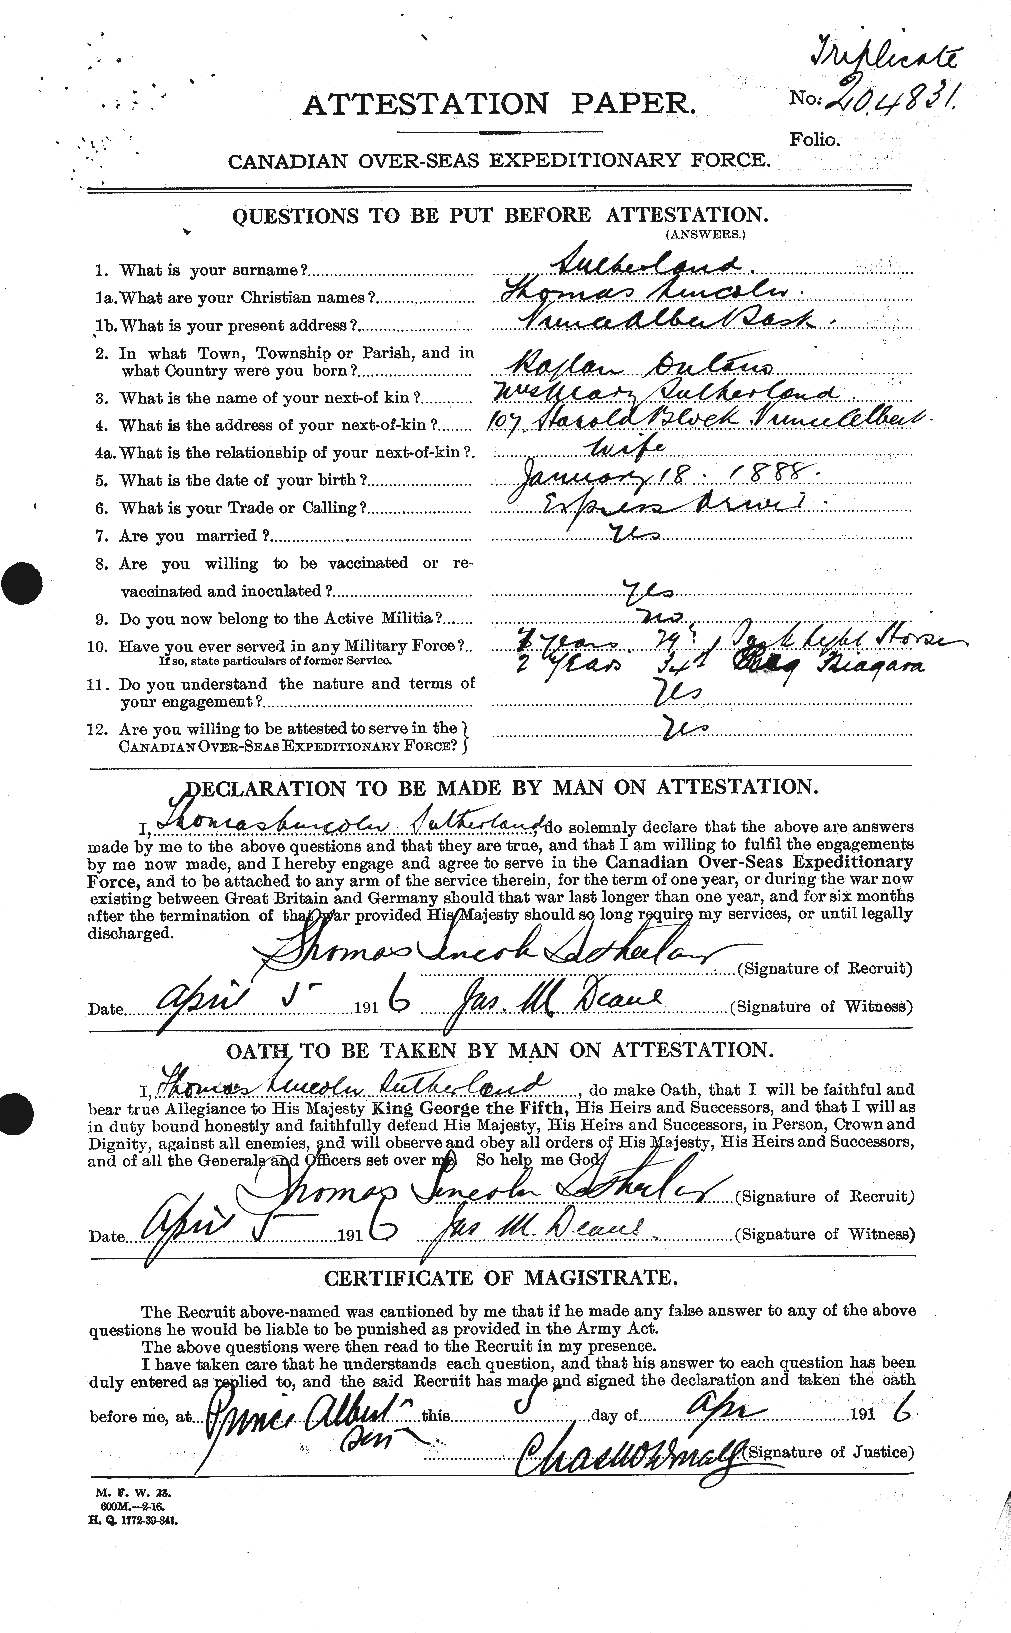 Personnel Records of the First World War - CEF 126544a